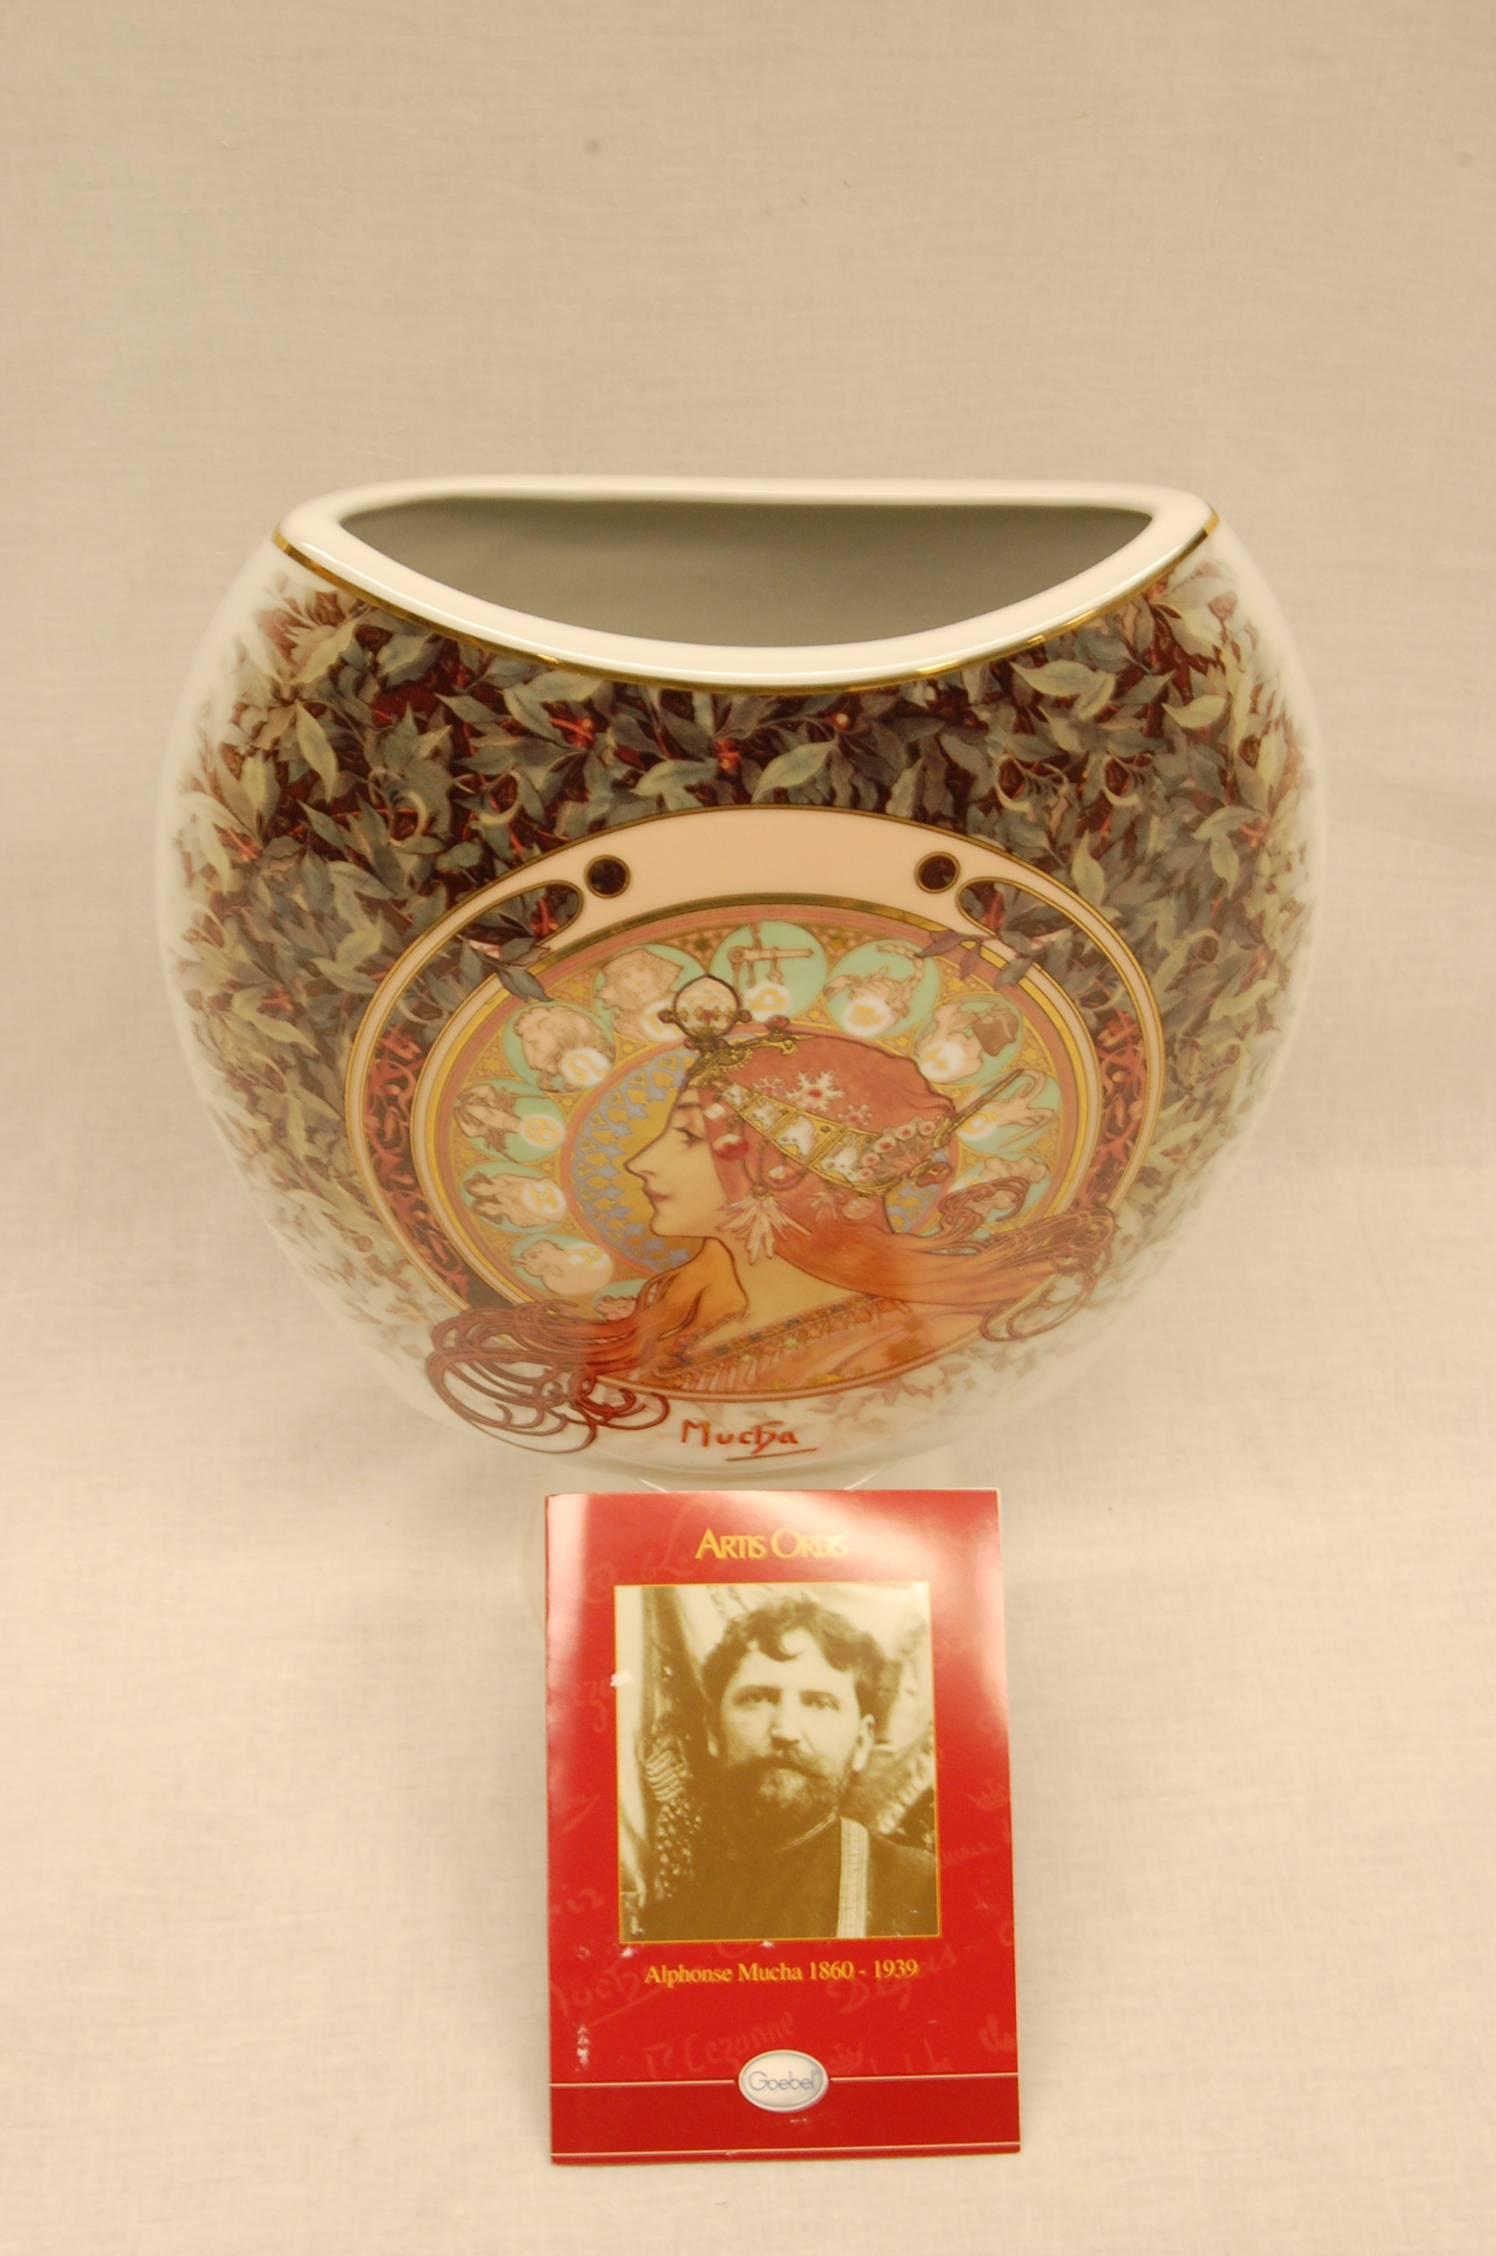 Alphonse Mucha (1860-1939) pattern: Artis-Orbis Alphonse Mucha by Goebel [Co Goemisgaomu], these are very rare and included are the original boxes and “Certificates of Authenticity”. Available serial #'s 1824; 1827; 1845; 1852; 1867; 1875. 